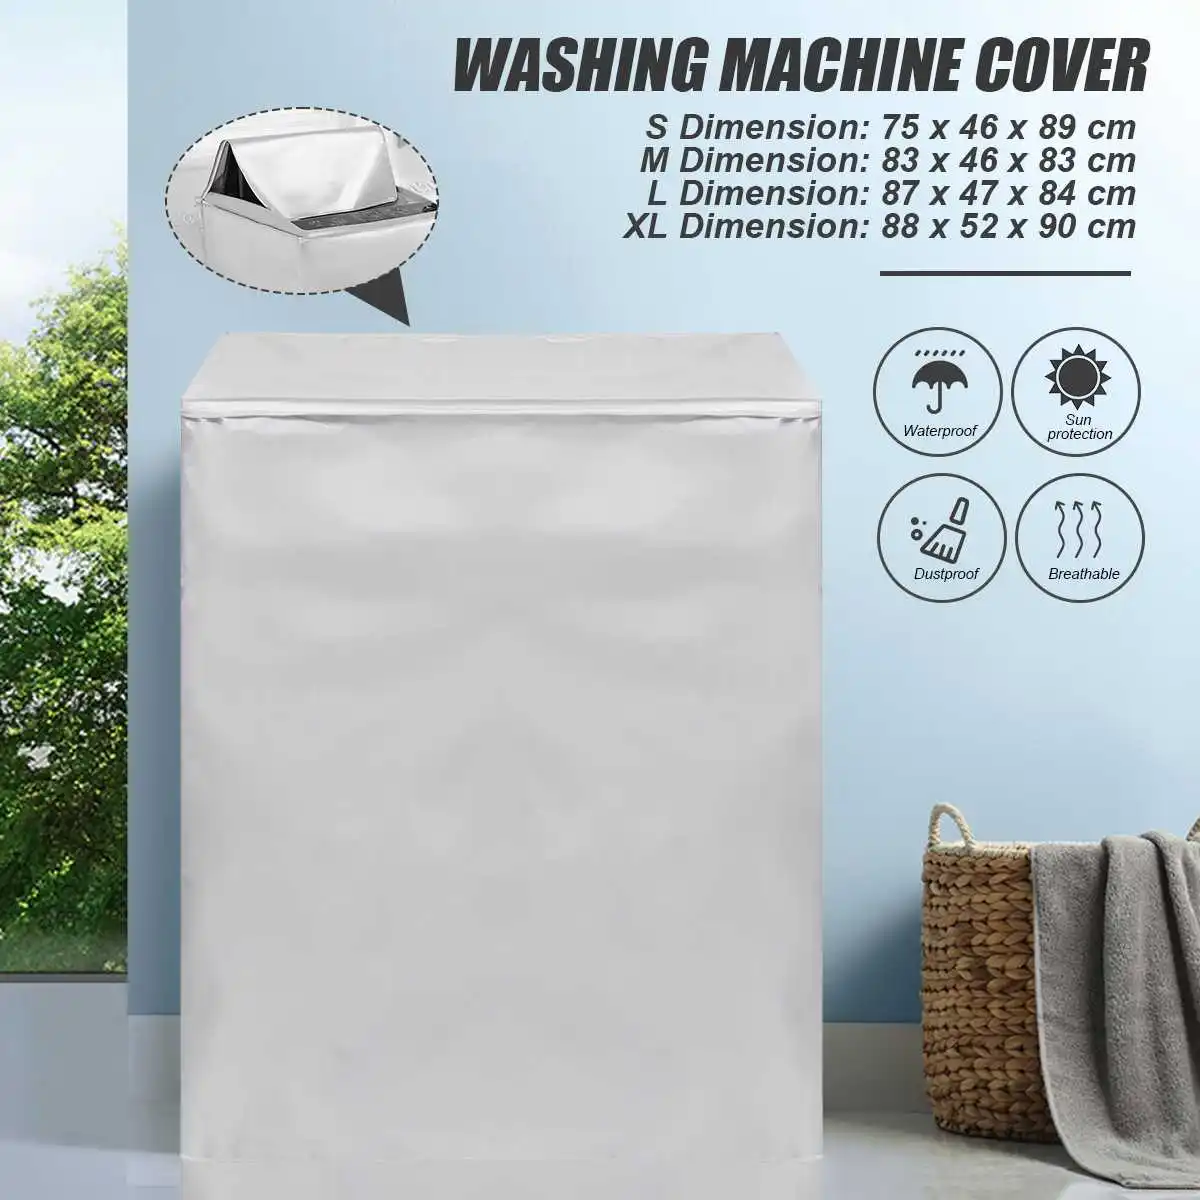 Mudacun Polyester Washing Machine Cover Dust Proof Cover Waterproof Case for Washing Machine 1Pc 